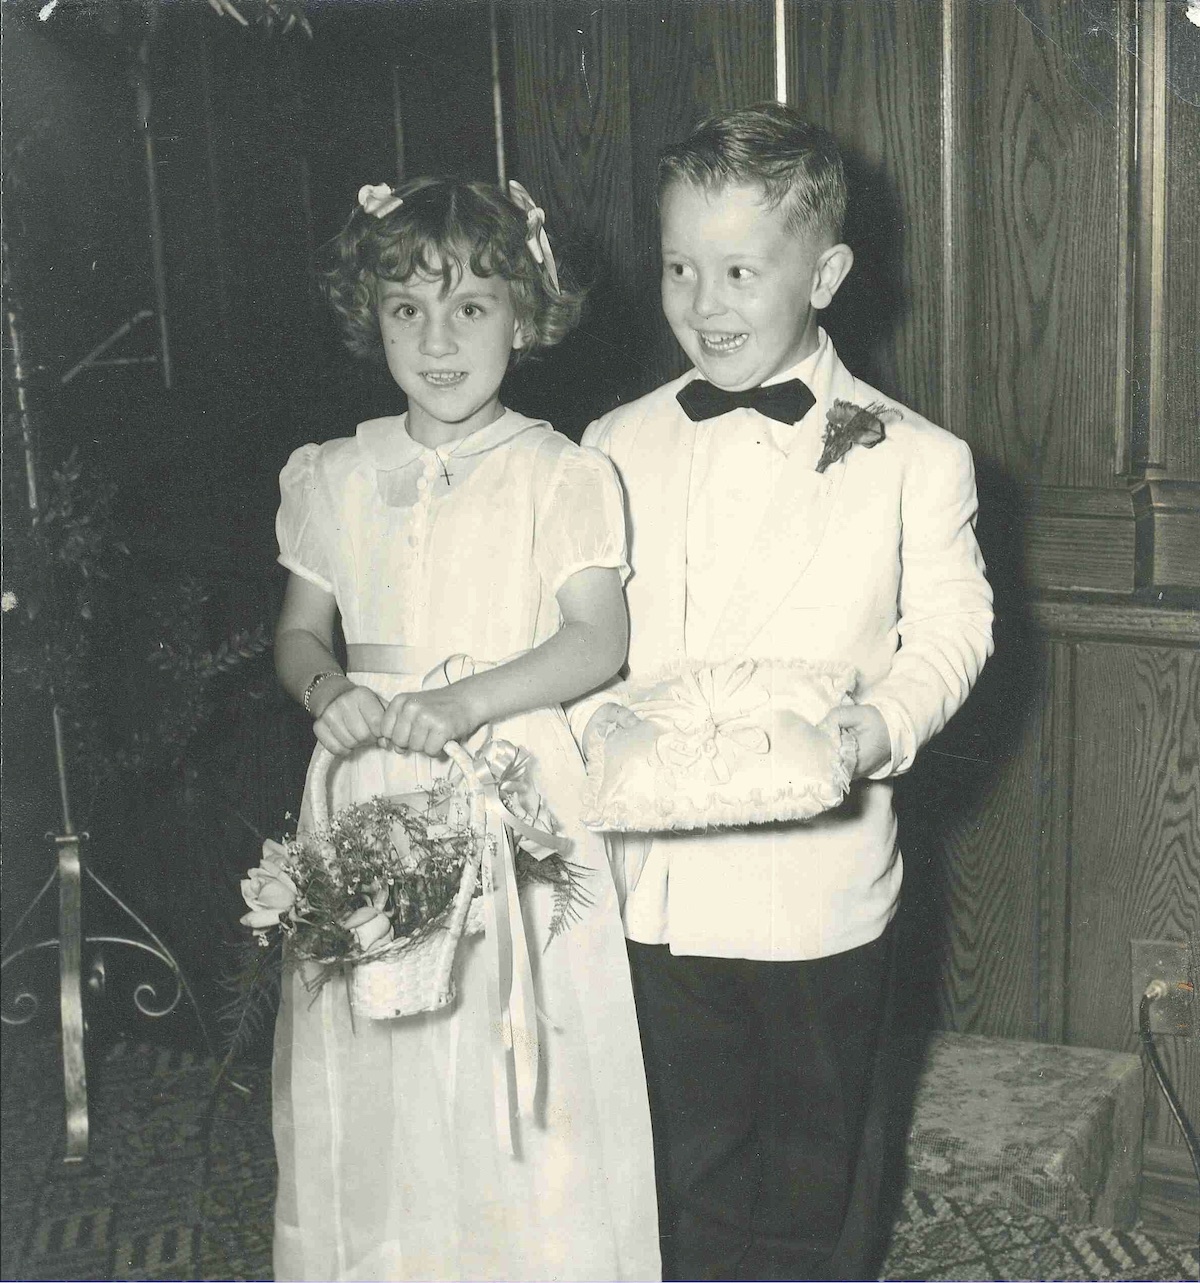 Jean-Nickolaus, age 4, as the ring bearer for a friend of the family’s wedding. Photo courtesy of Jean Tretter.